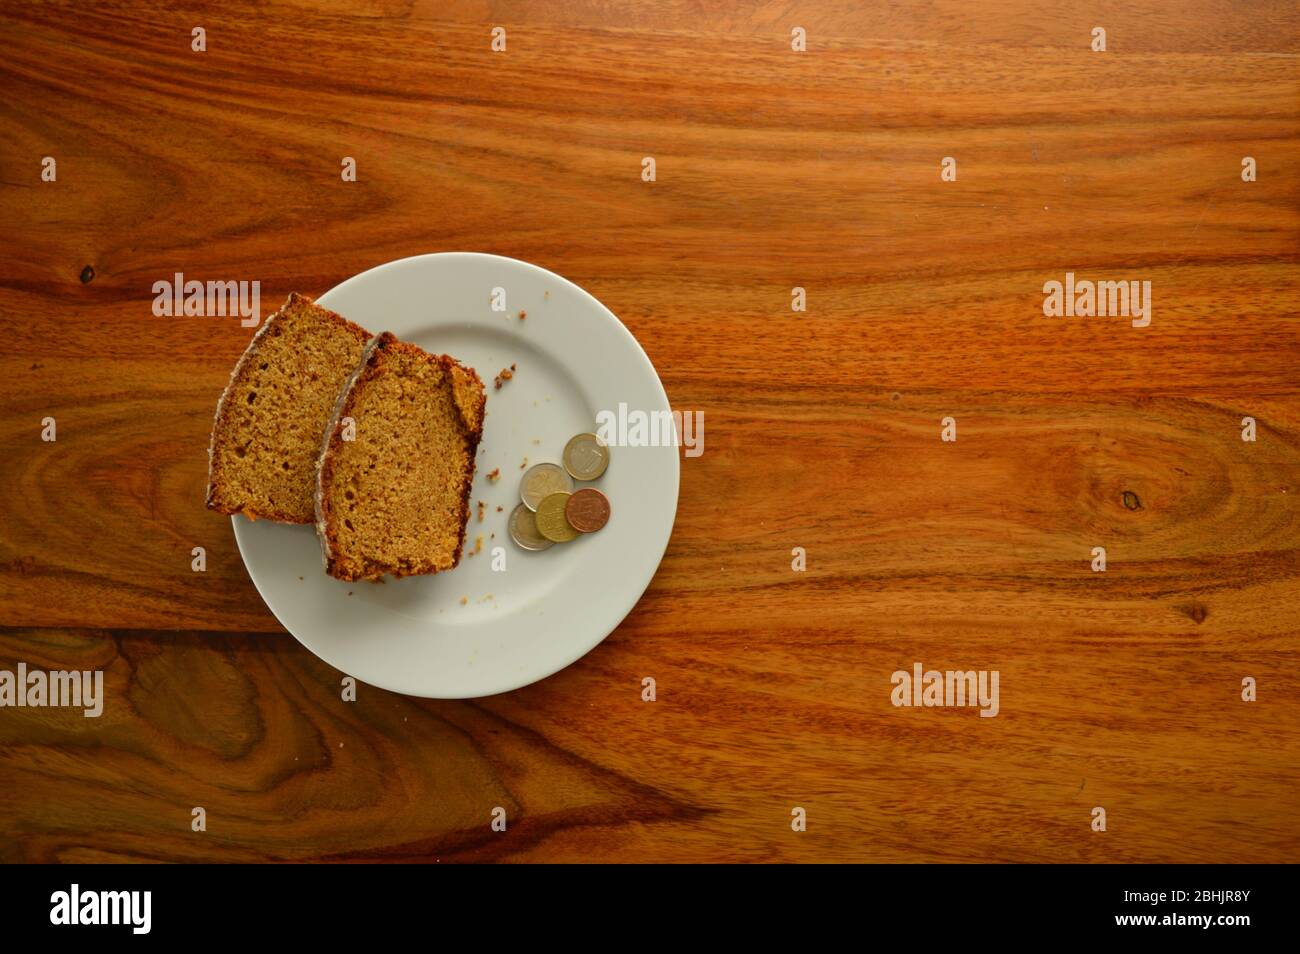 Rich Cake and Poor Money Stock Photo